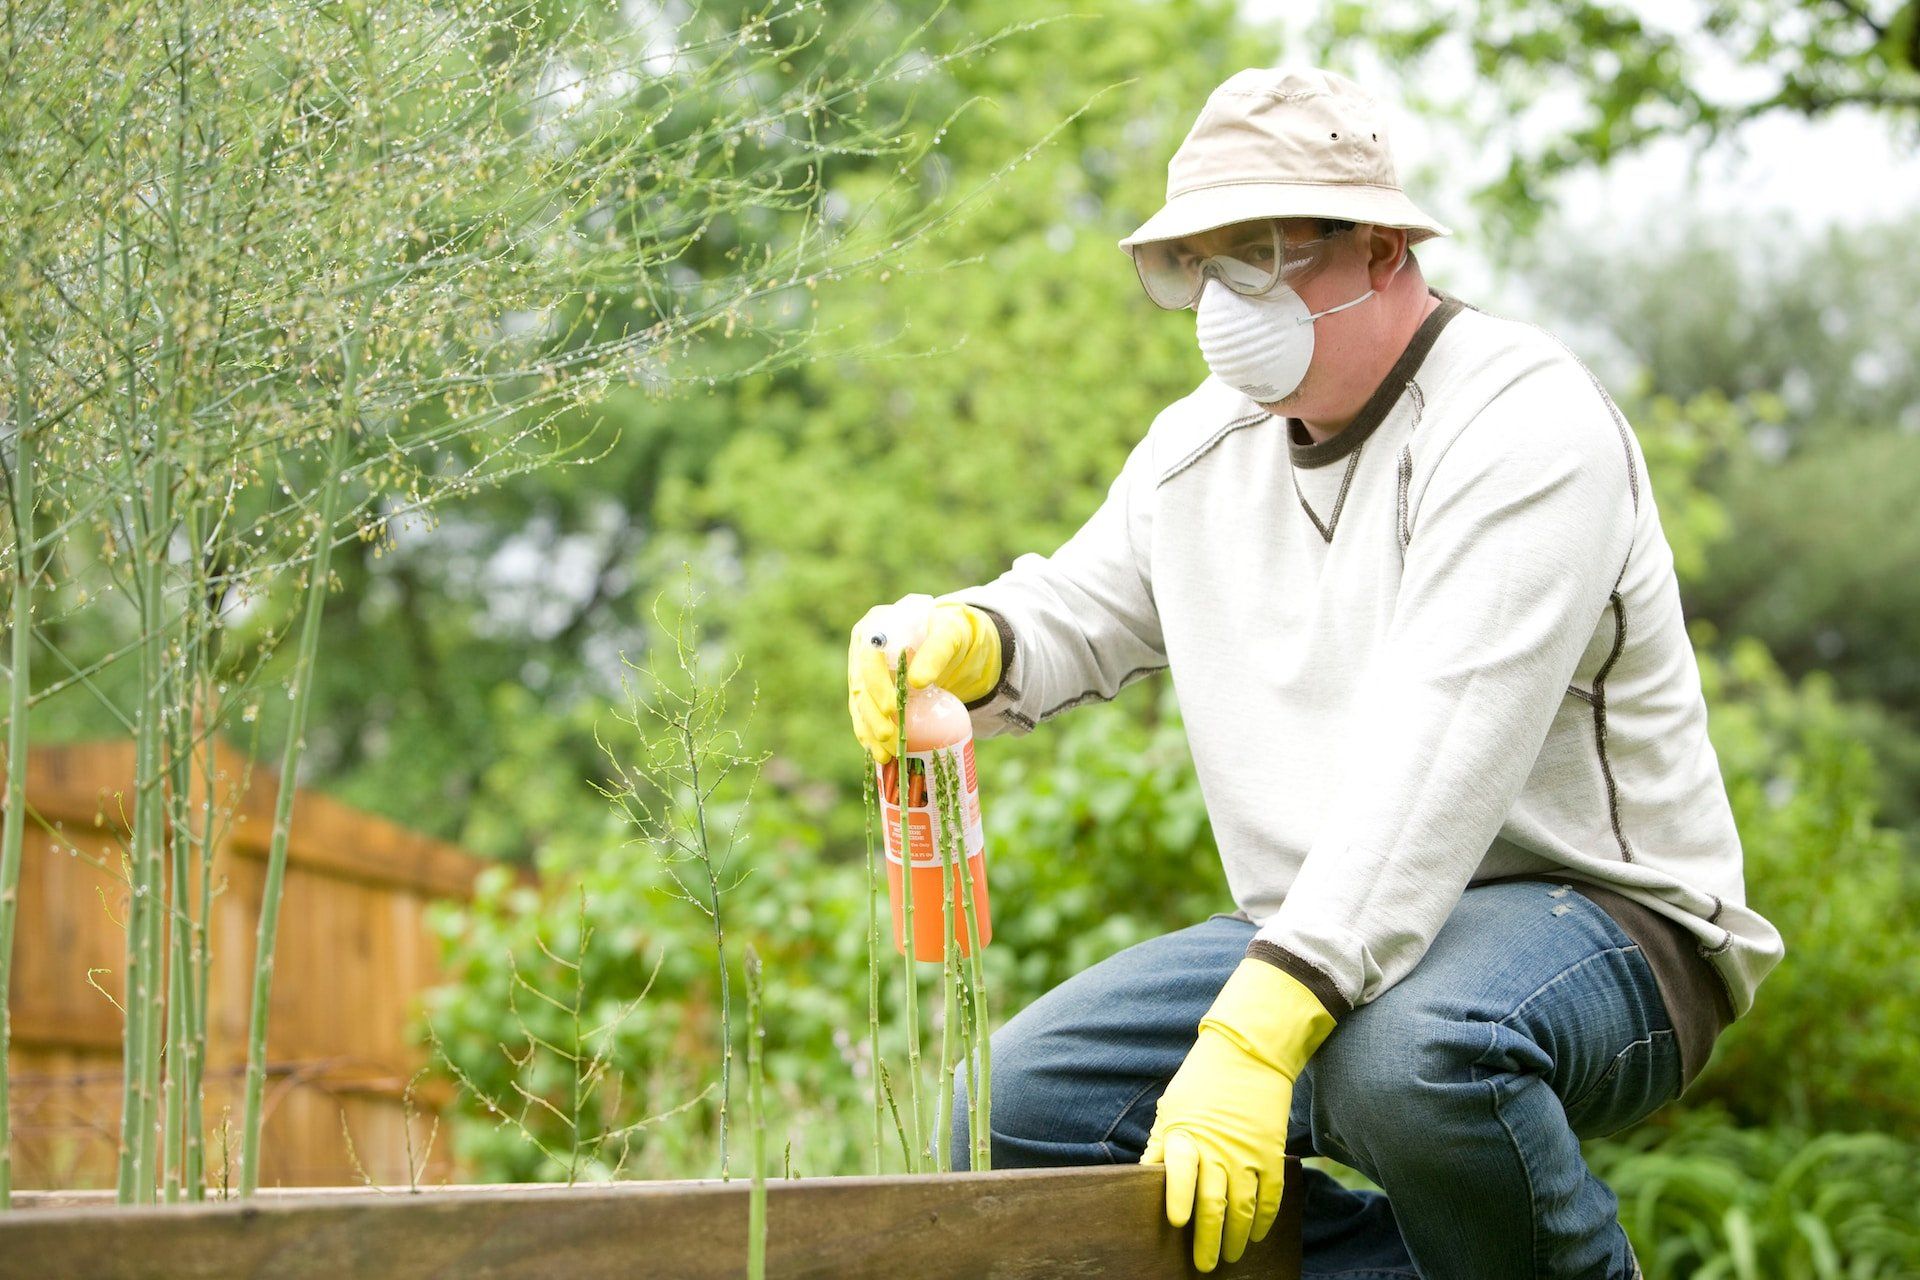 A man with protective gear spraying some kind of pesticide in a backyard garden